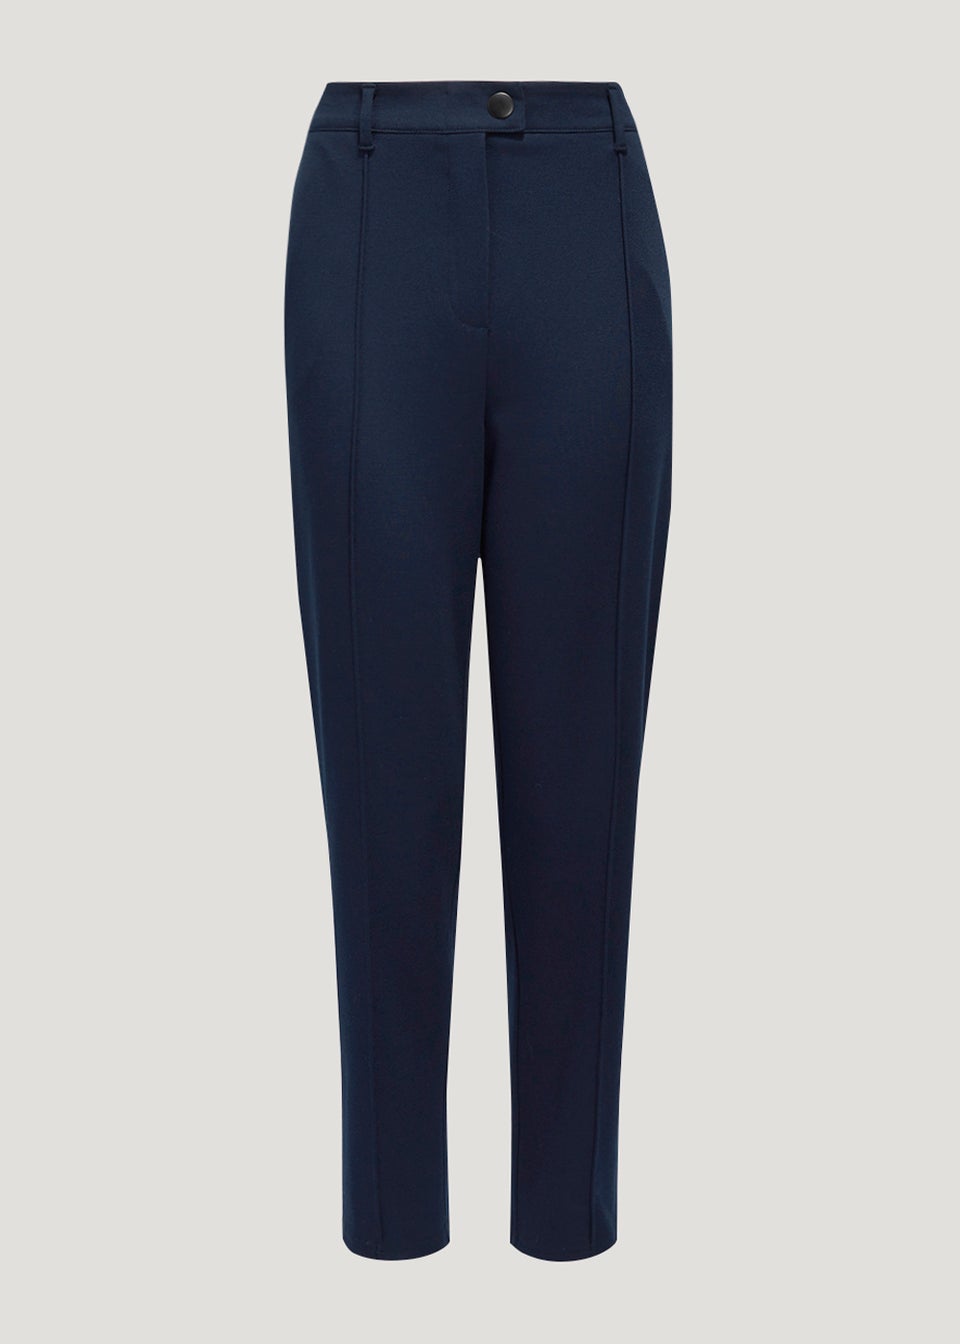 Navy Tapered Ponte Trousers - Matalan